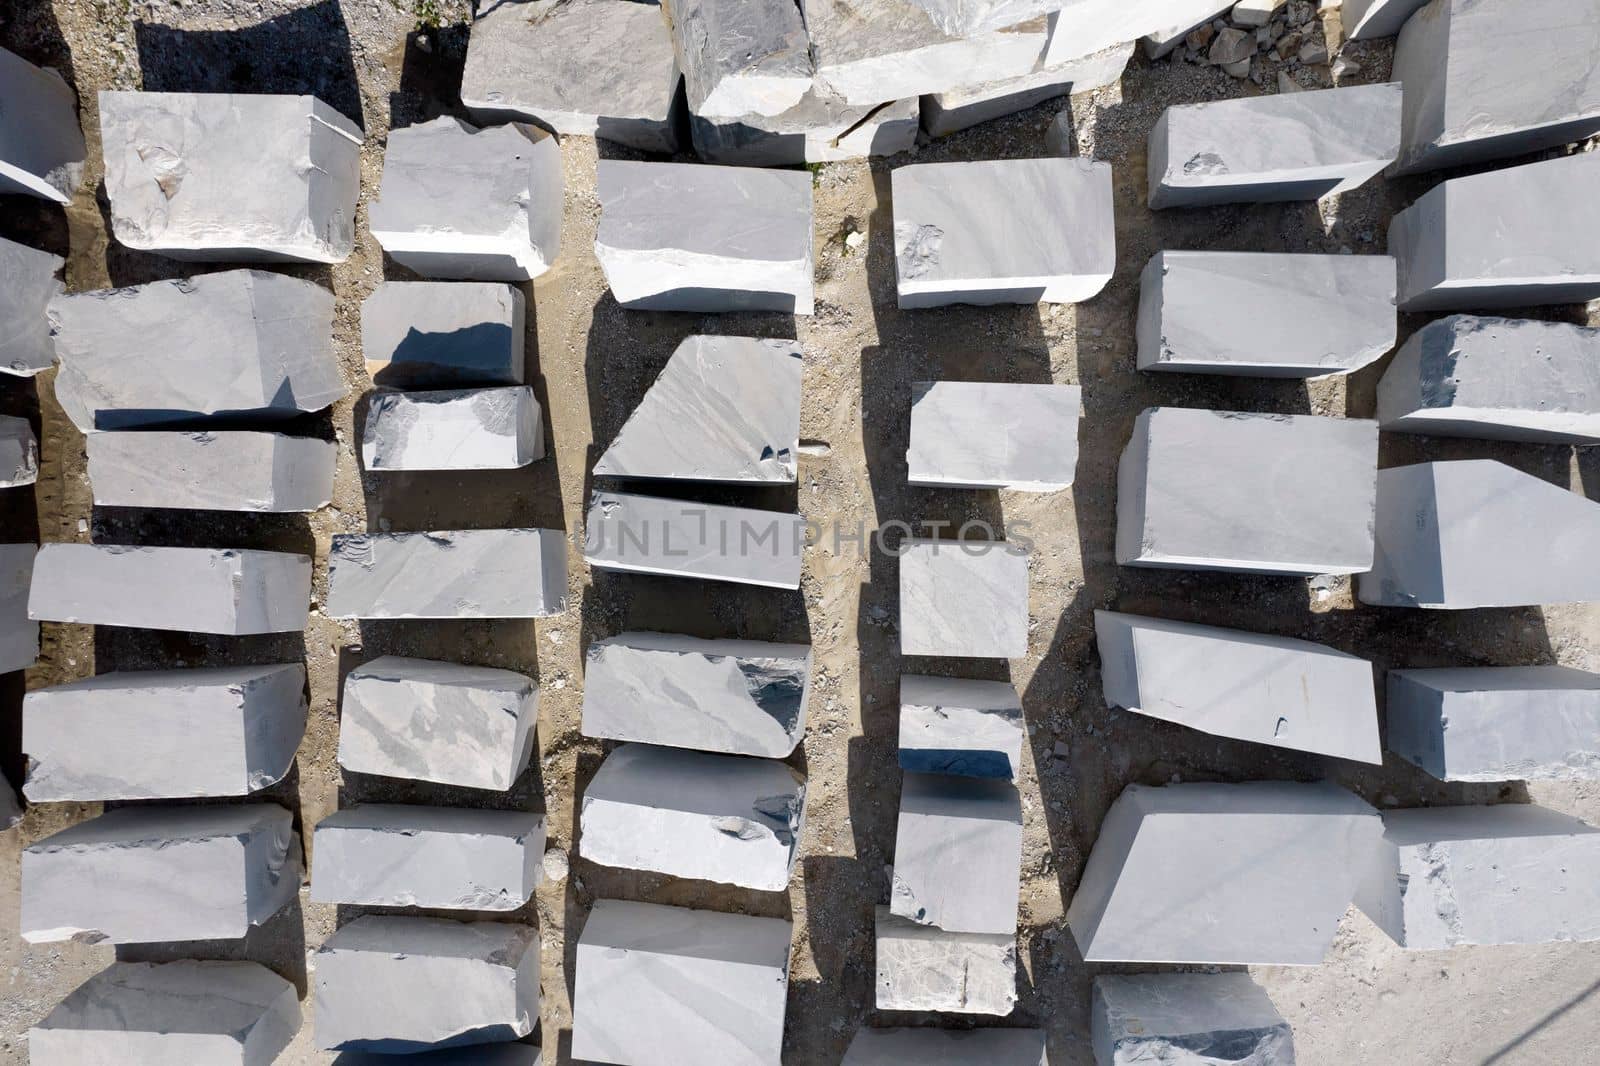 Aerial view of a deposit of marble blocks by fotografiche.eu